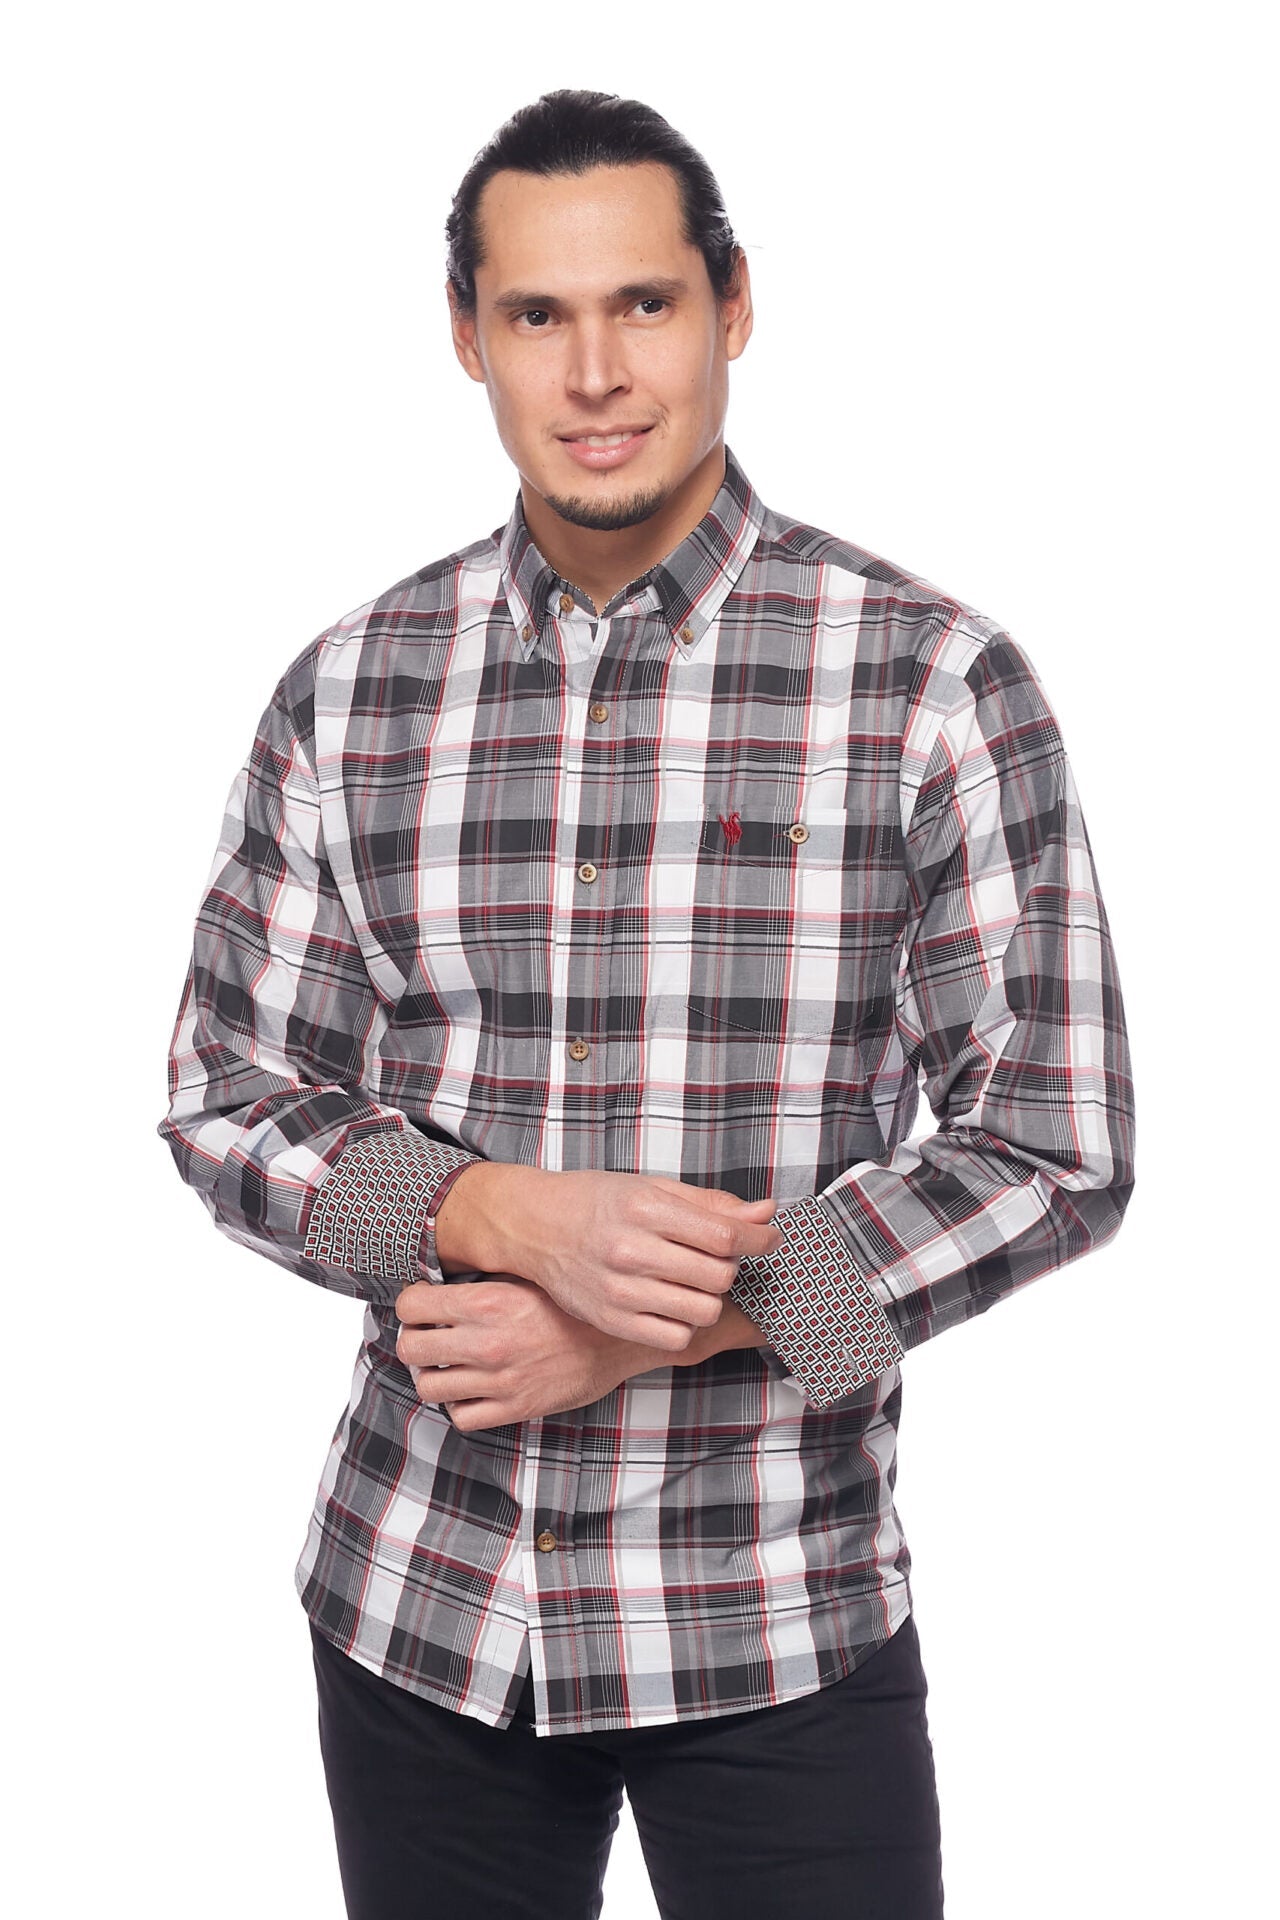 BUTTON-DOWN Men's Western Long Sleeve, 100% Cotton Plaid Shirts With Snap ButtonsS - With Logo